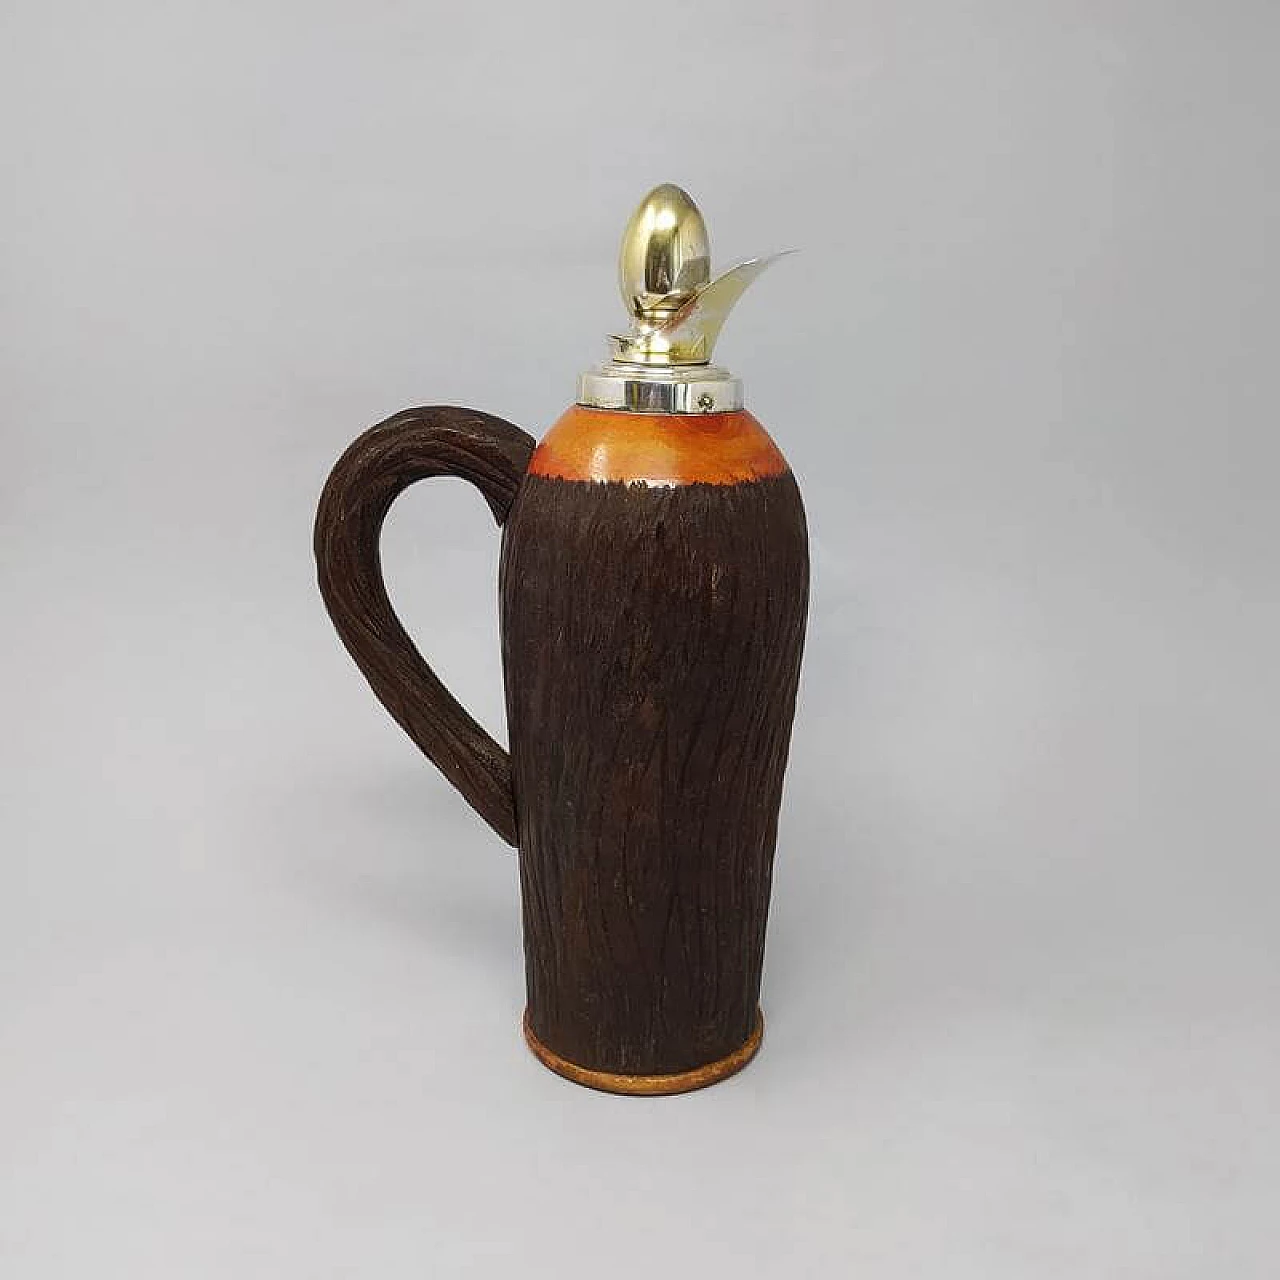 1950s Stunning Aldo Tura Pitcher in Brass and Wood, Made in Italy 1183878